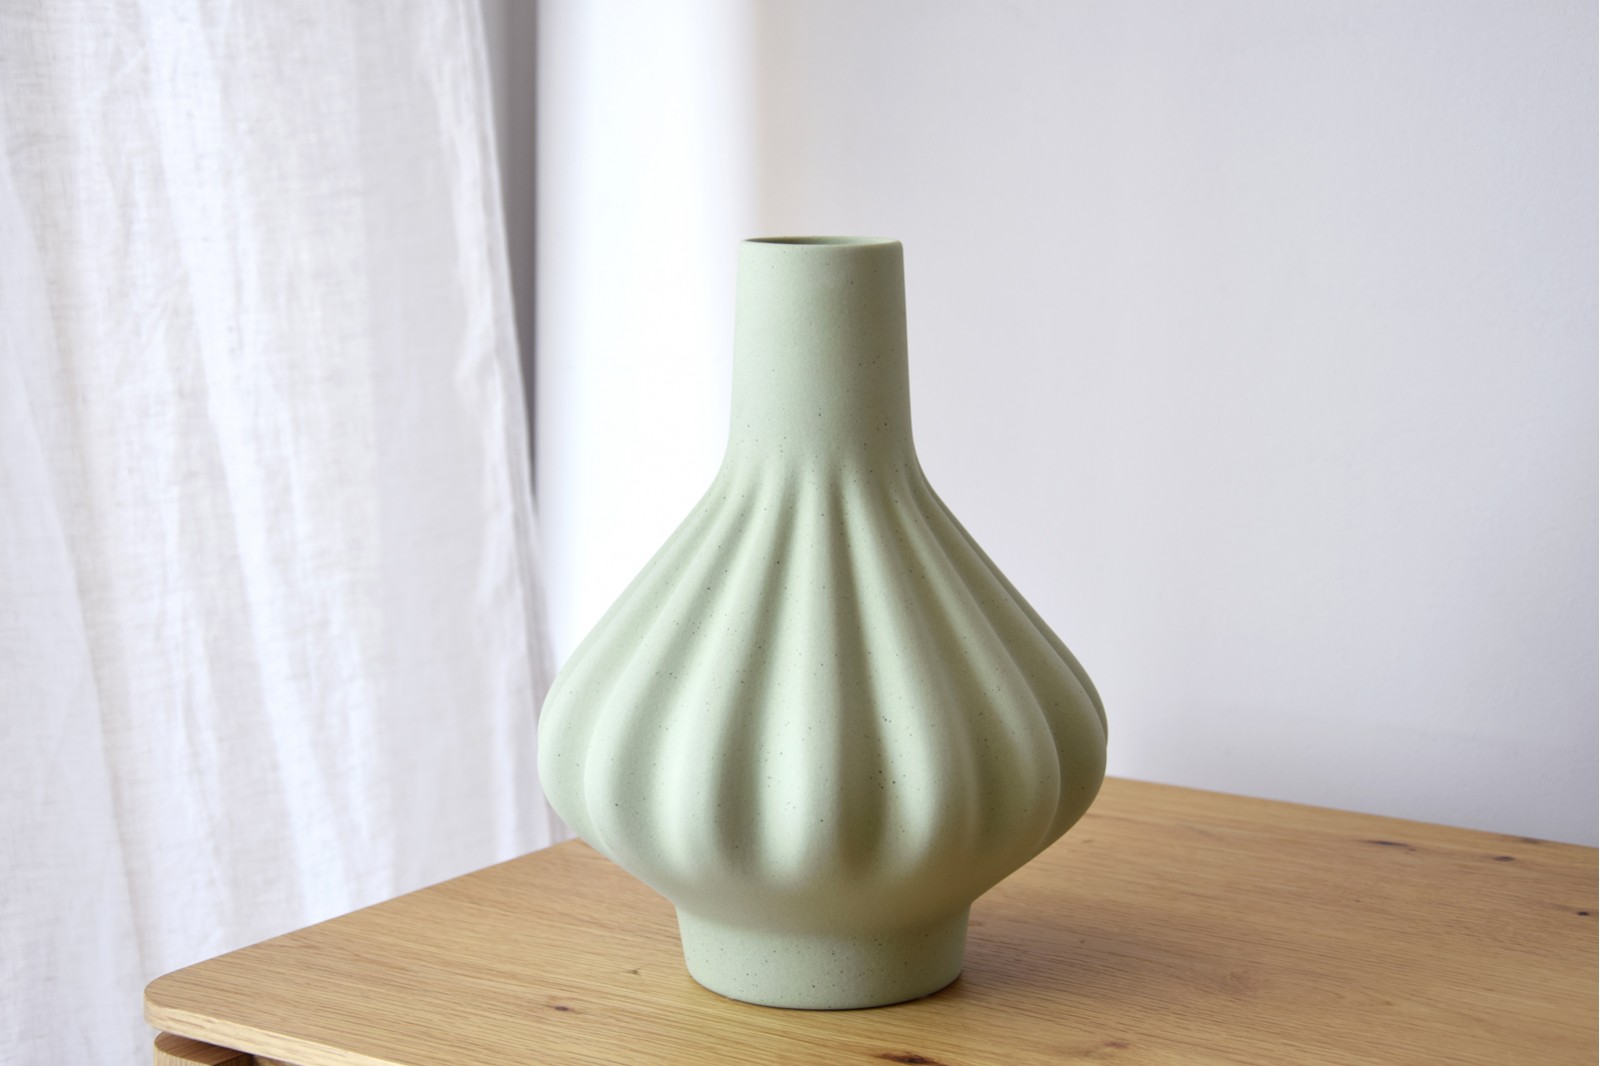 BELLOWS COLLECTION: TEXTURED CERAMIC VASES